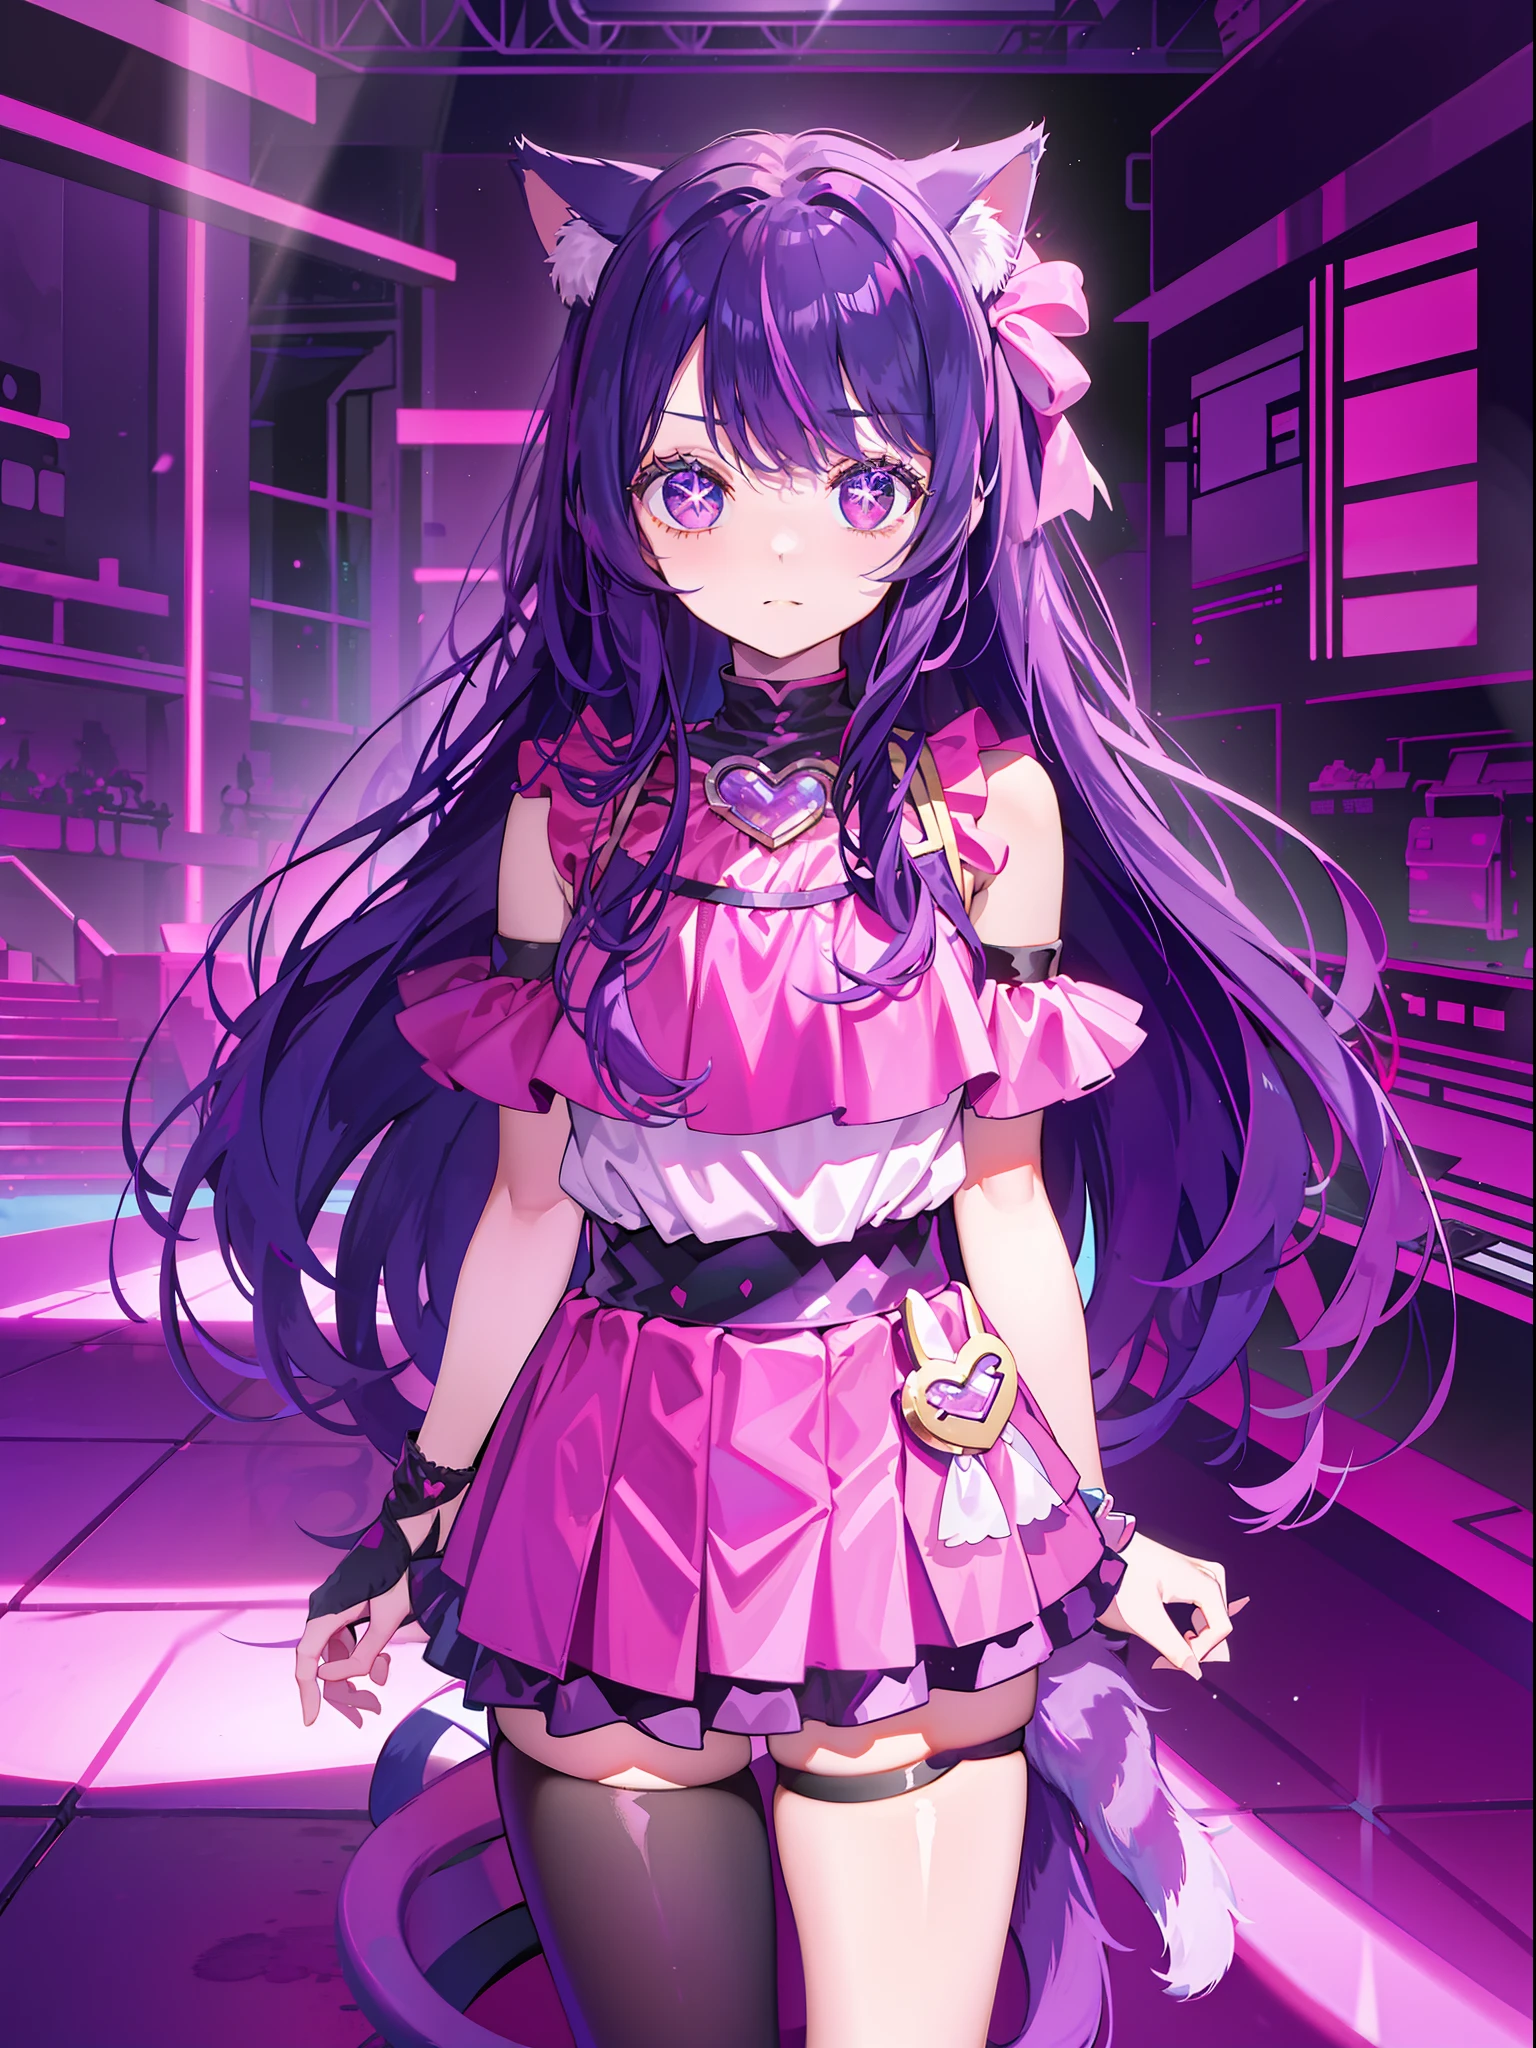 A , Shoulders Long Hair, Purple Hair, Small Purple Cat Ears, A Purple Cat Tail, Idol Clothes, Amine Style